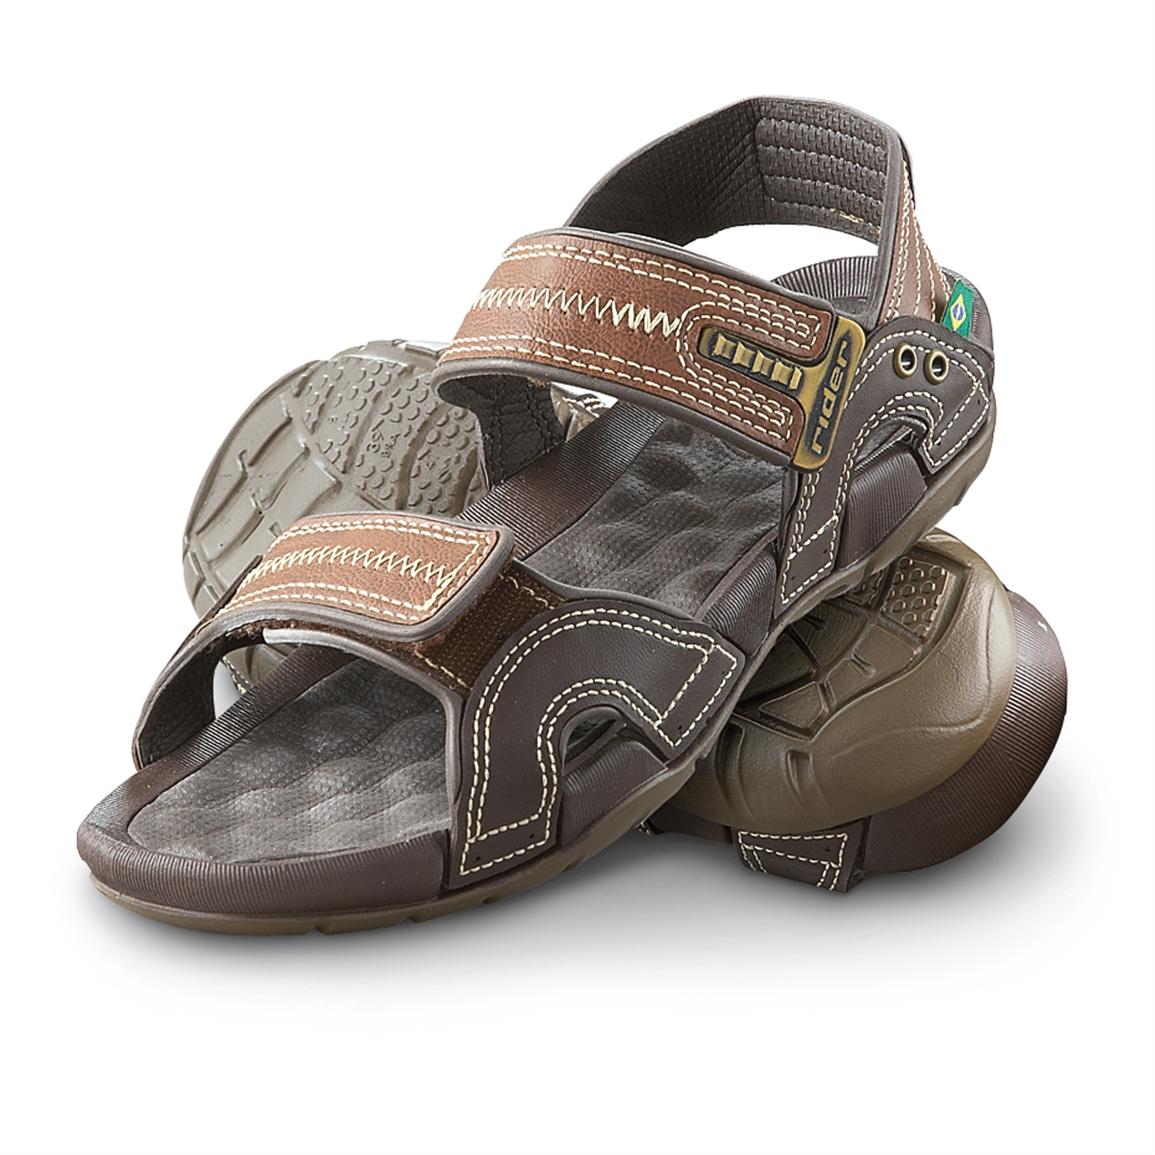  Men s  Rider  Outback Adventure Sandals  Brown 171010 Sandals  at Sportsman s  Guide